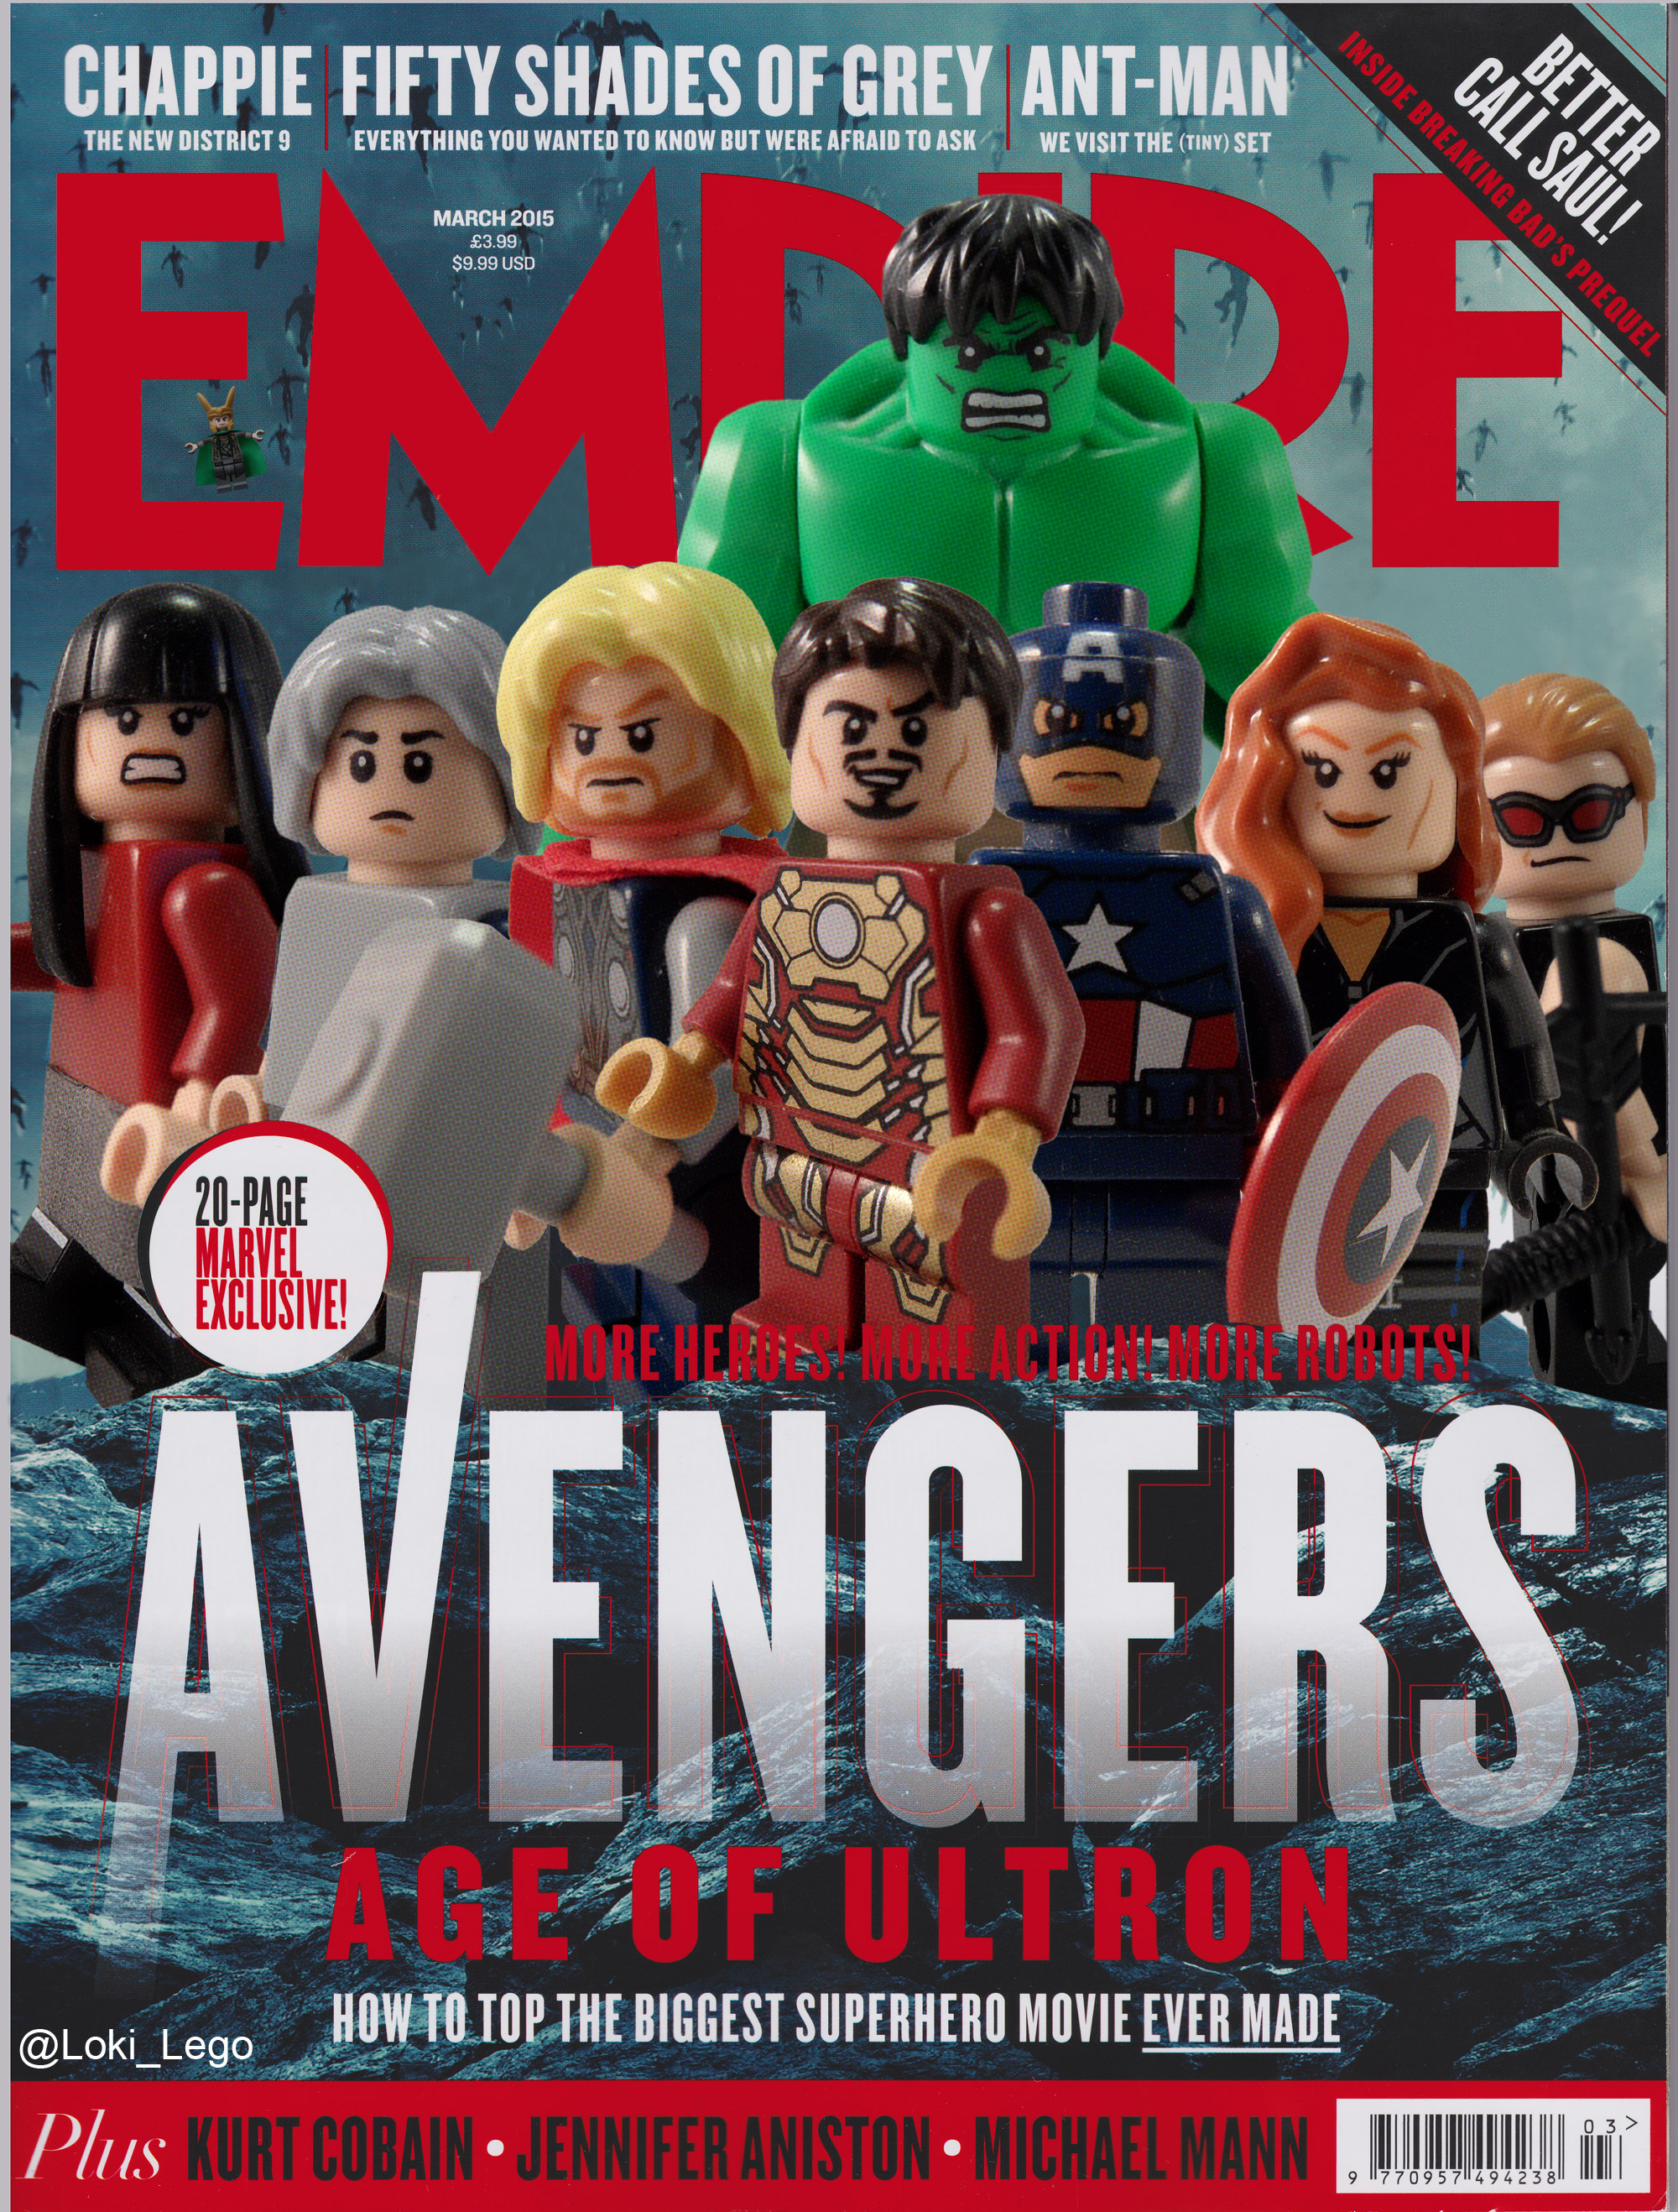 You are currently viewing Lego Avengers Assemble on the Avengers: Age of Ultron Cover of Empire Magazine